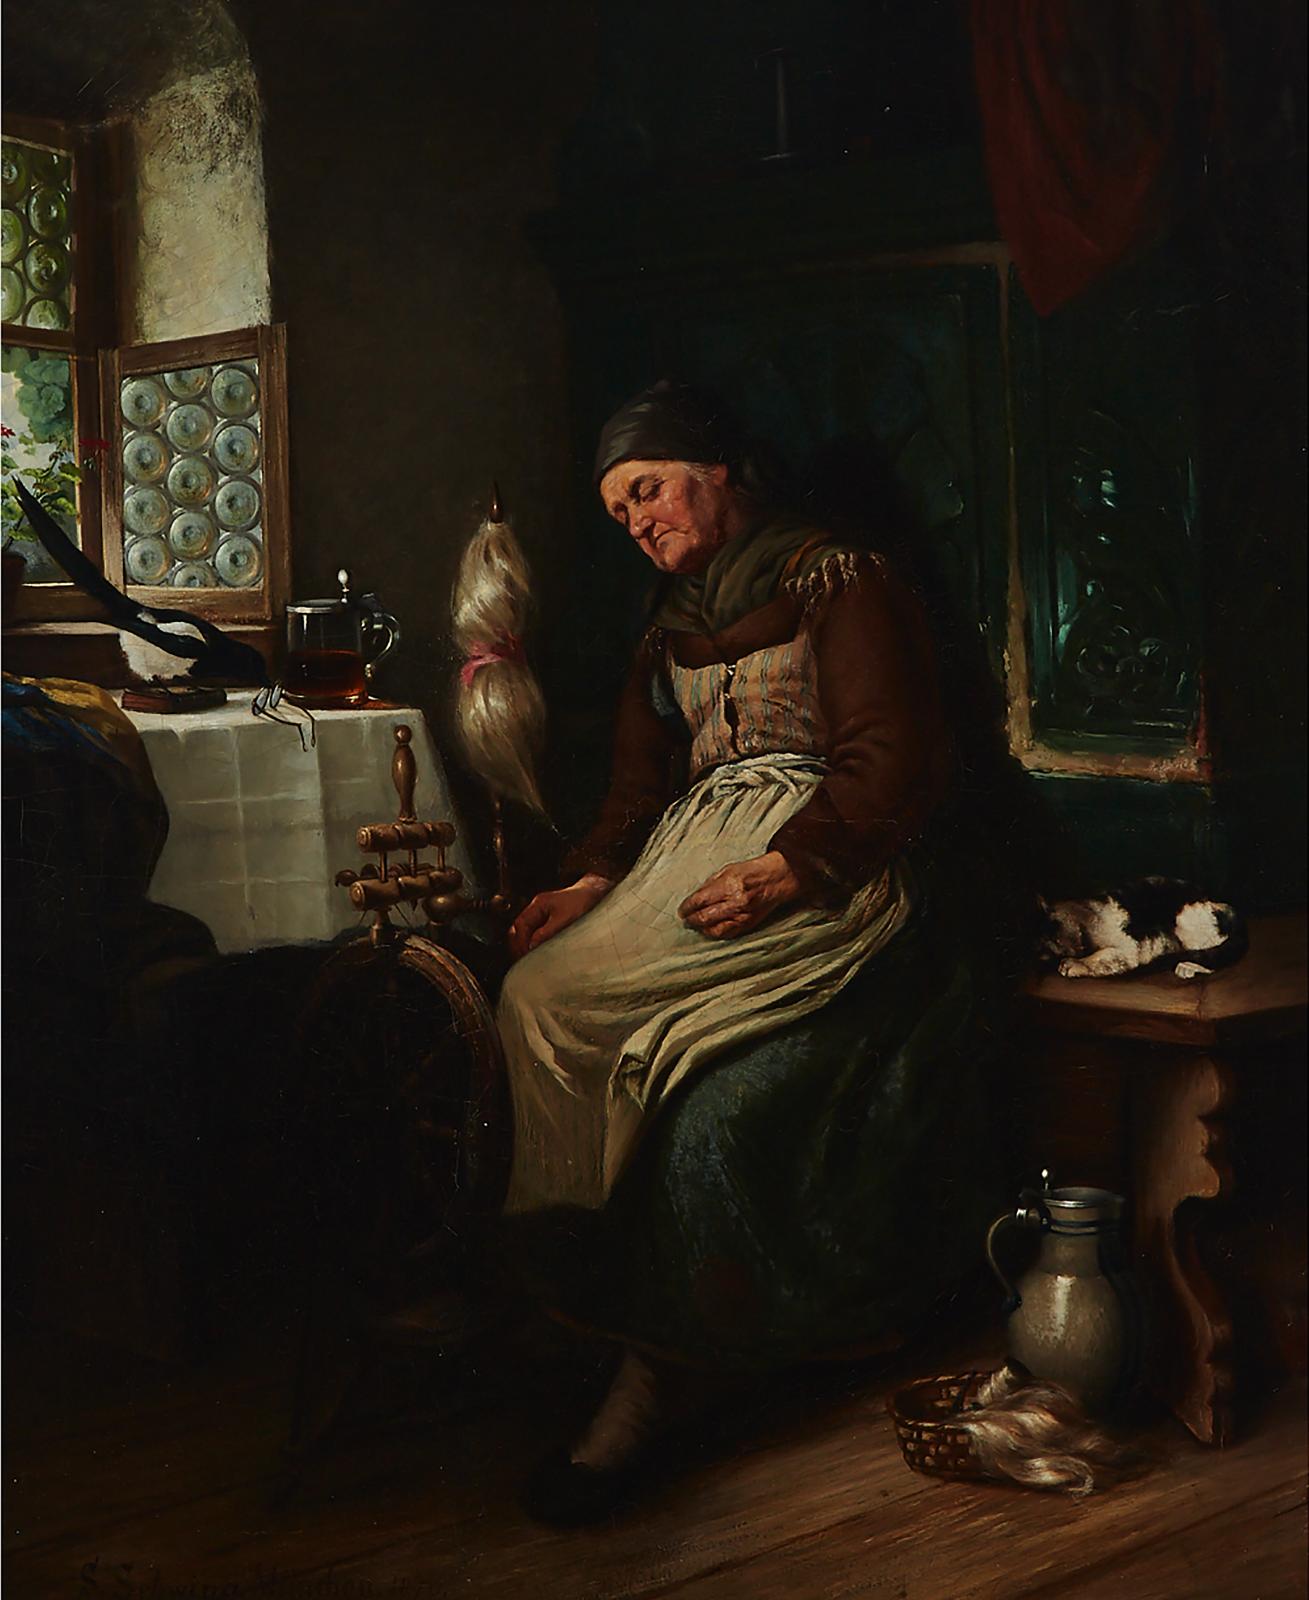 S. Schwing (1870) - Old Spinner Napping In A Kitchen With Her Cat, 1870